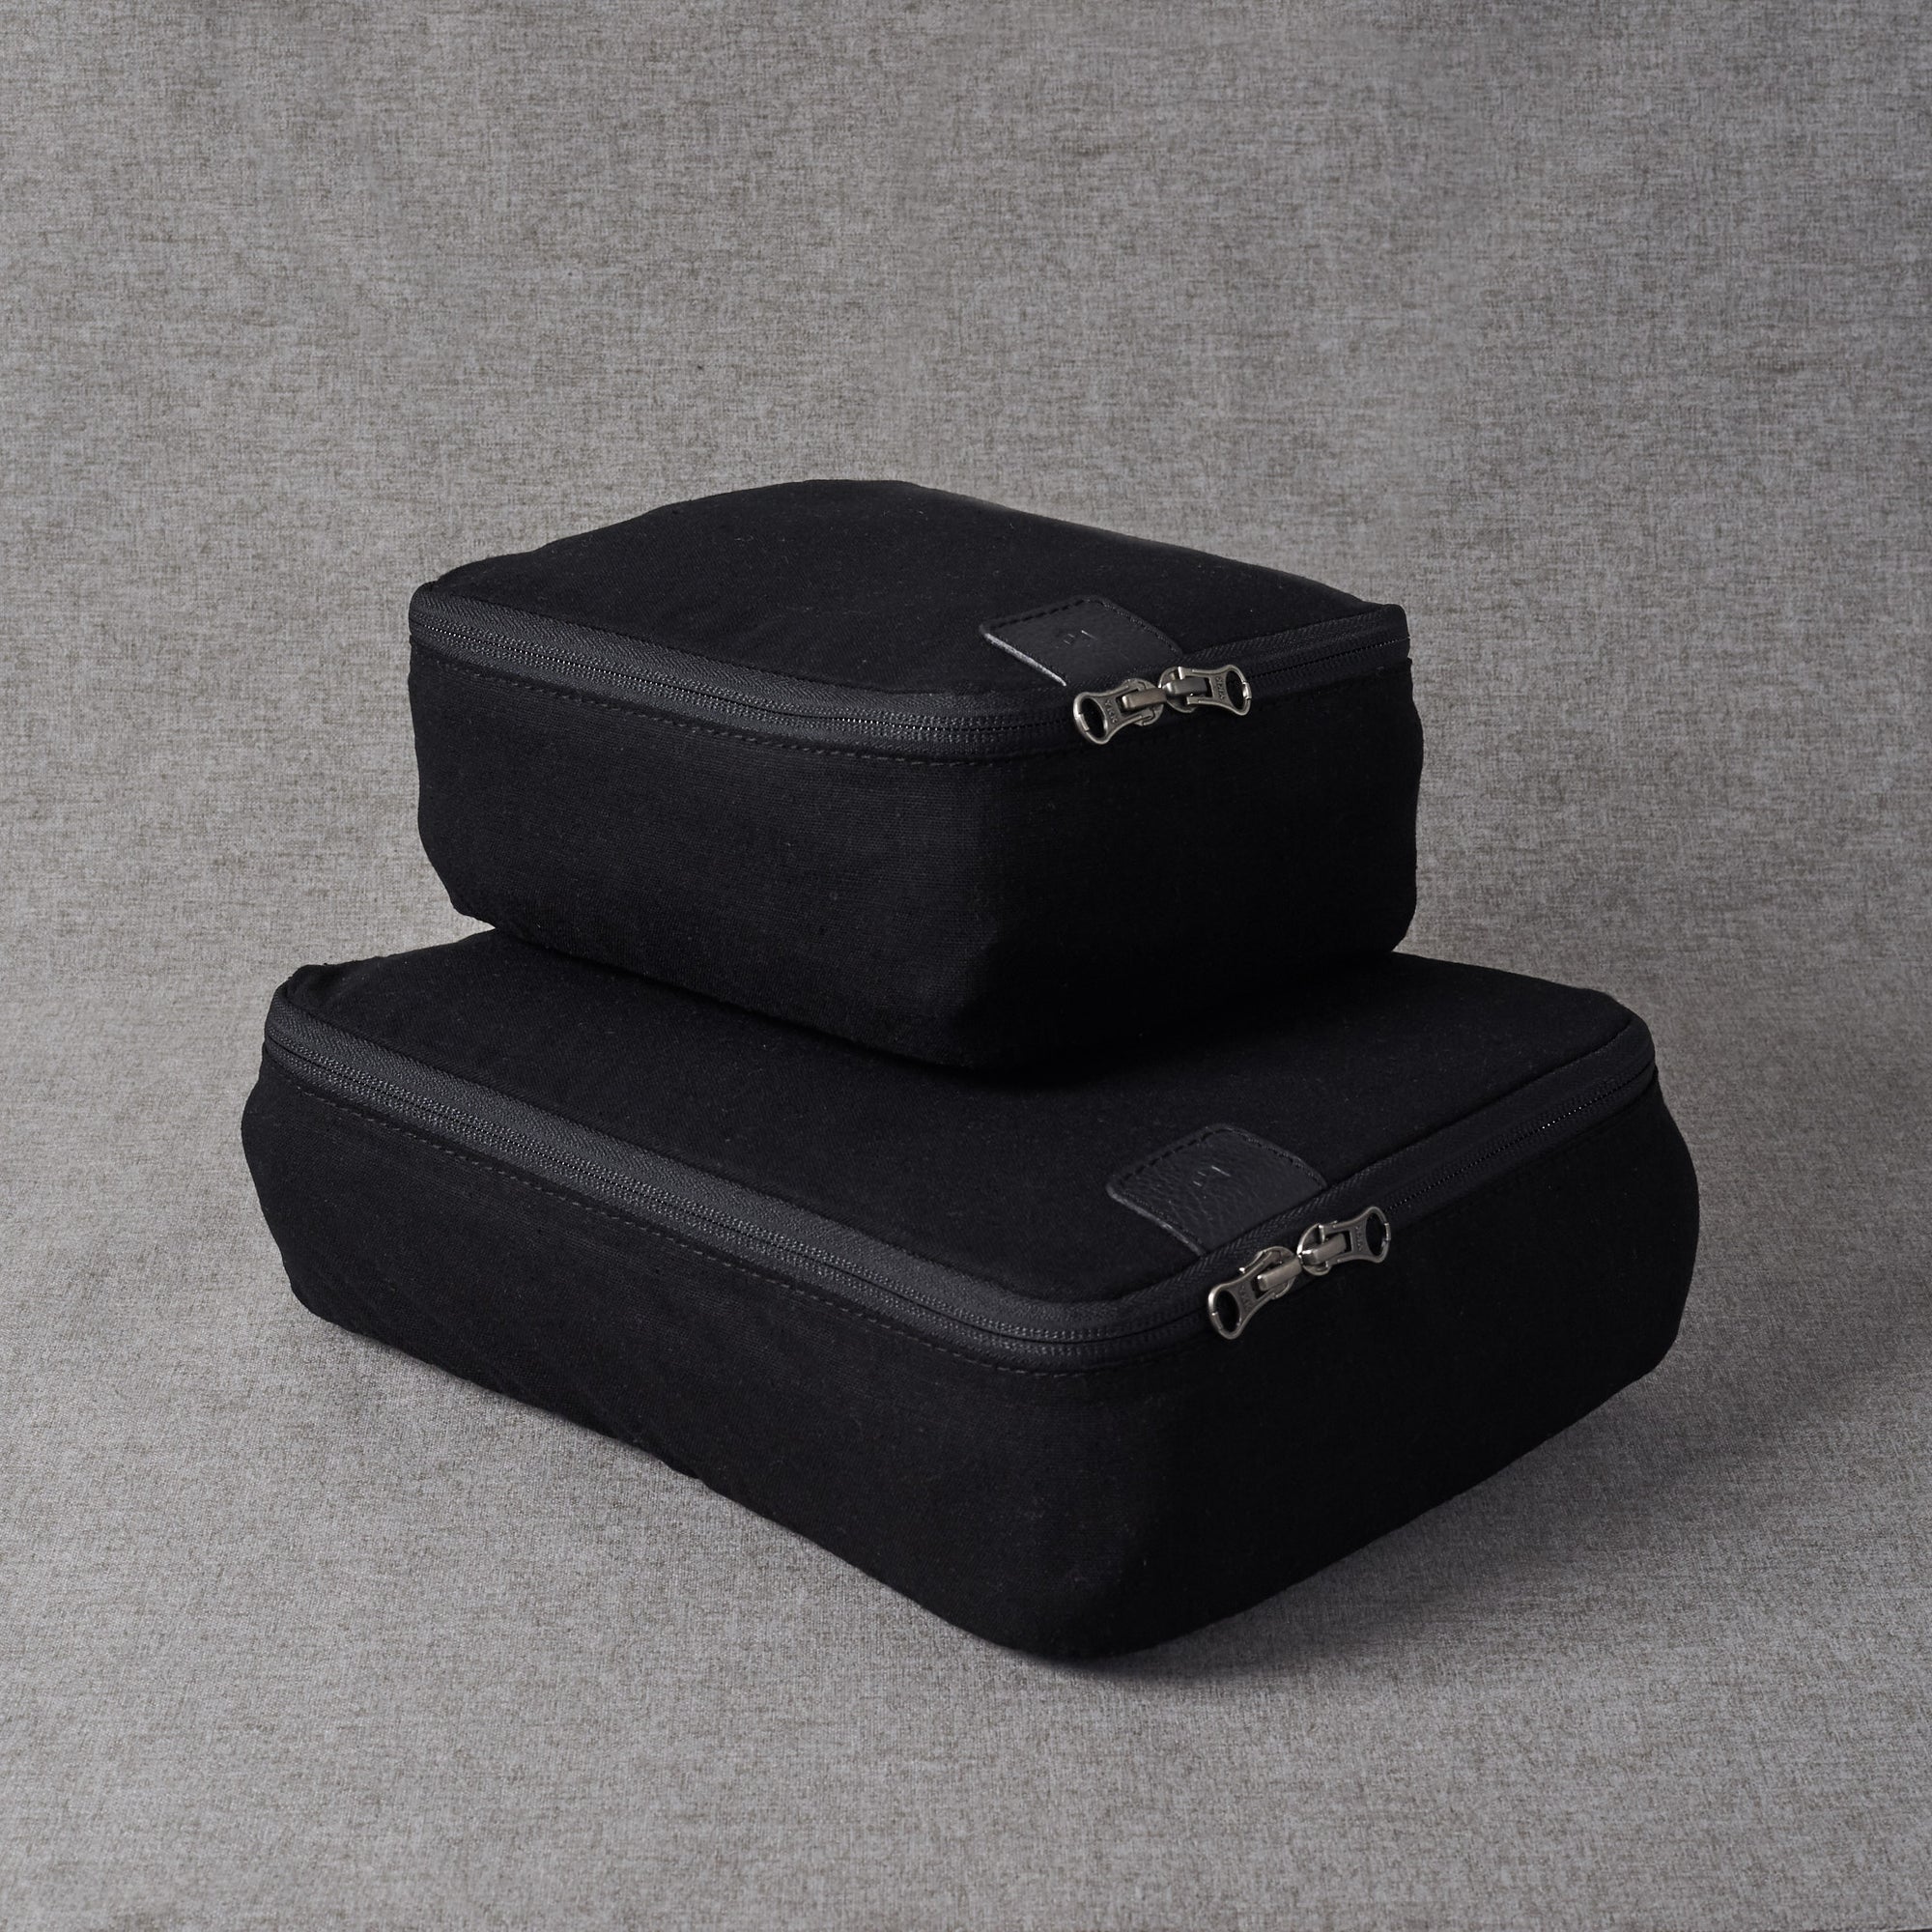 Black Linen Packing Cubes, Clothes Storage by Capra Leather